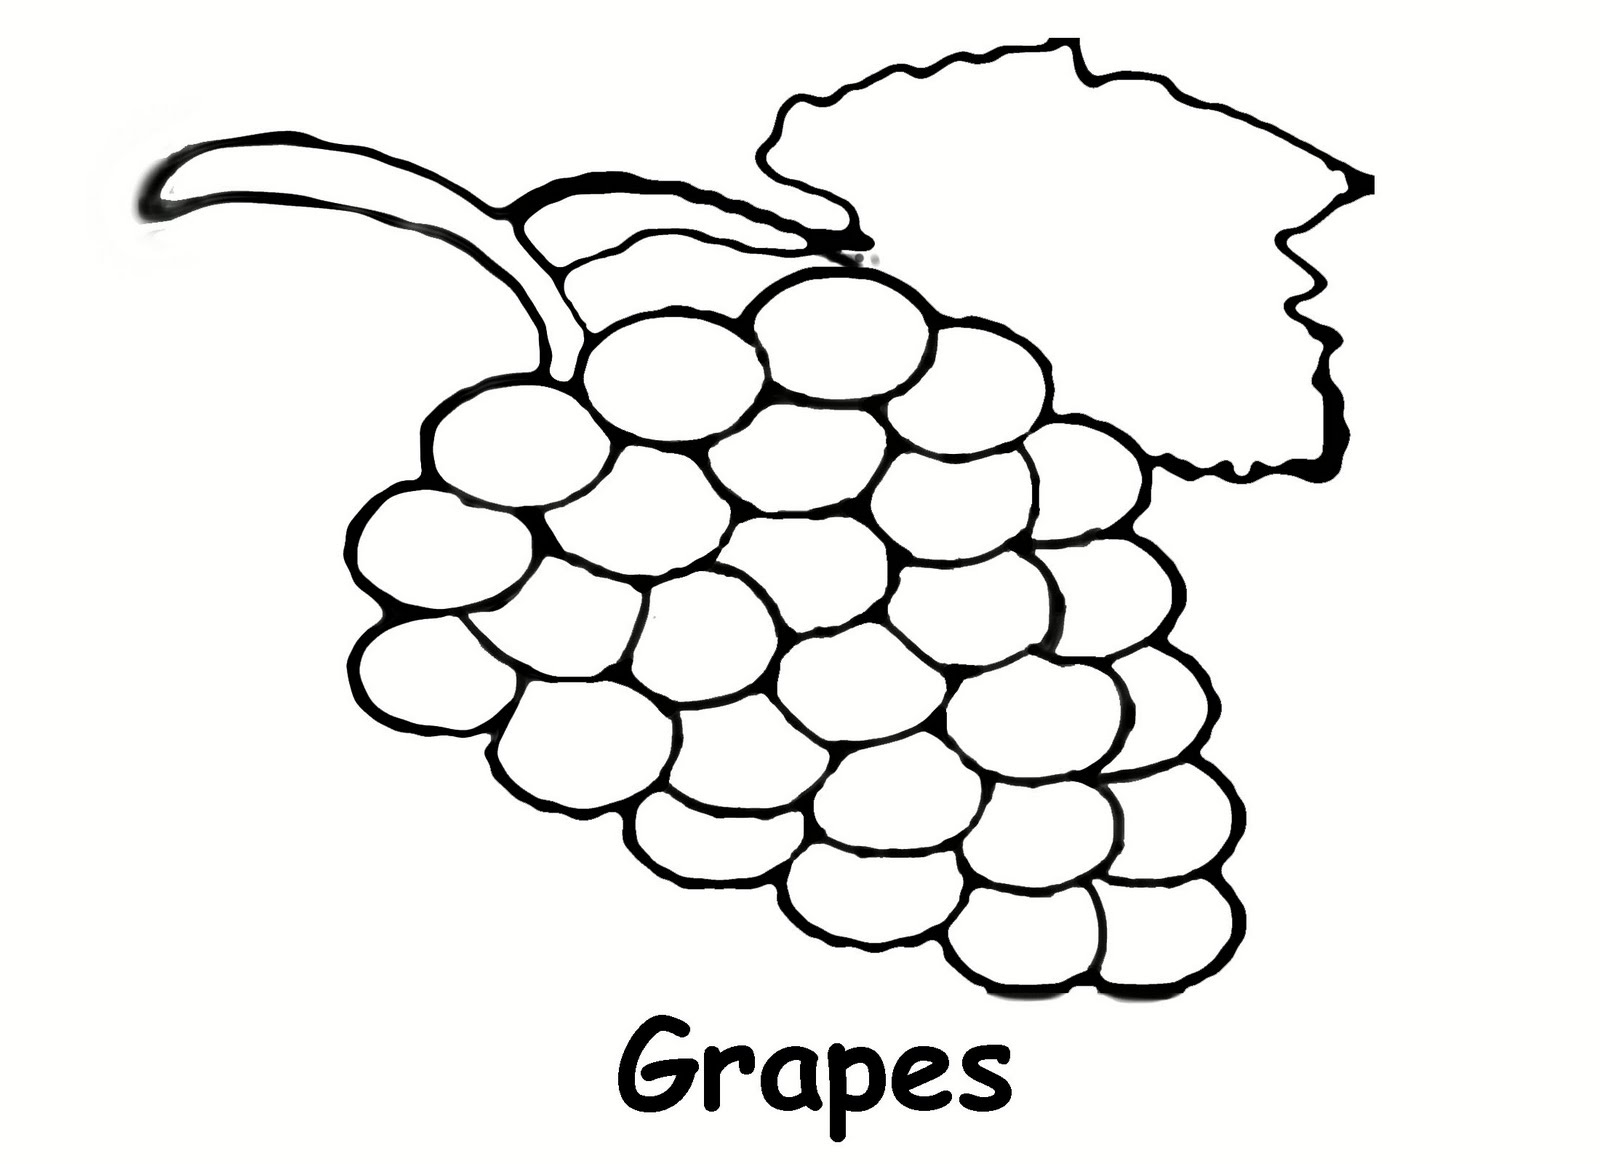 Share more than 141 grapes outline drawing latest - vietkidsiq.edu.vn